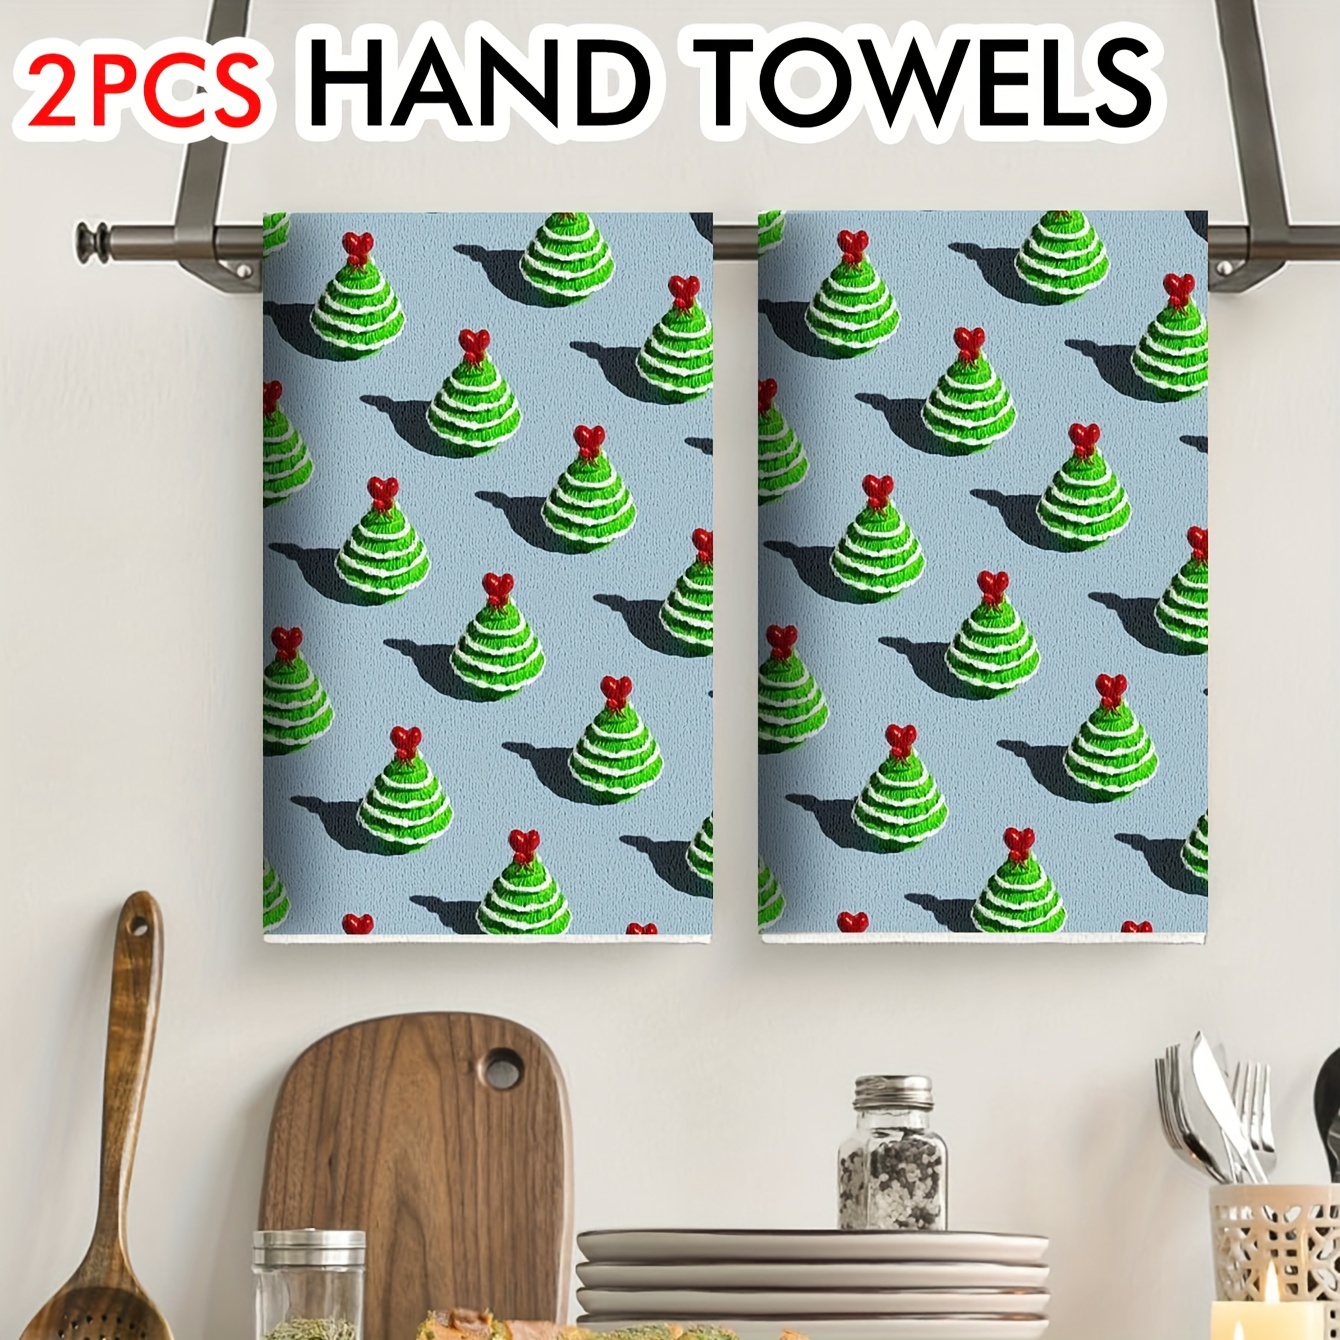 Kitchen Hand Towels, Hanging Towel For Wiping Hands, Highly